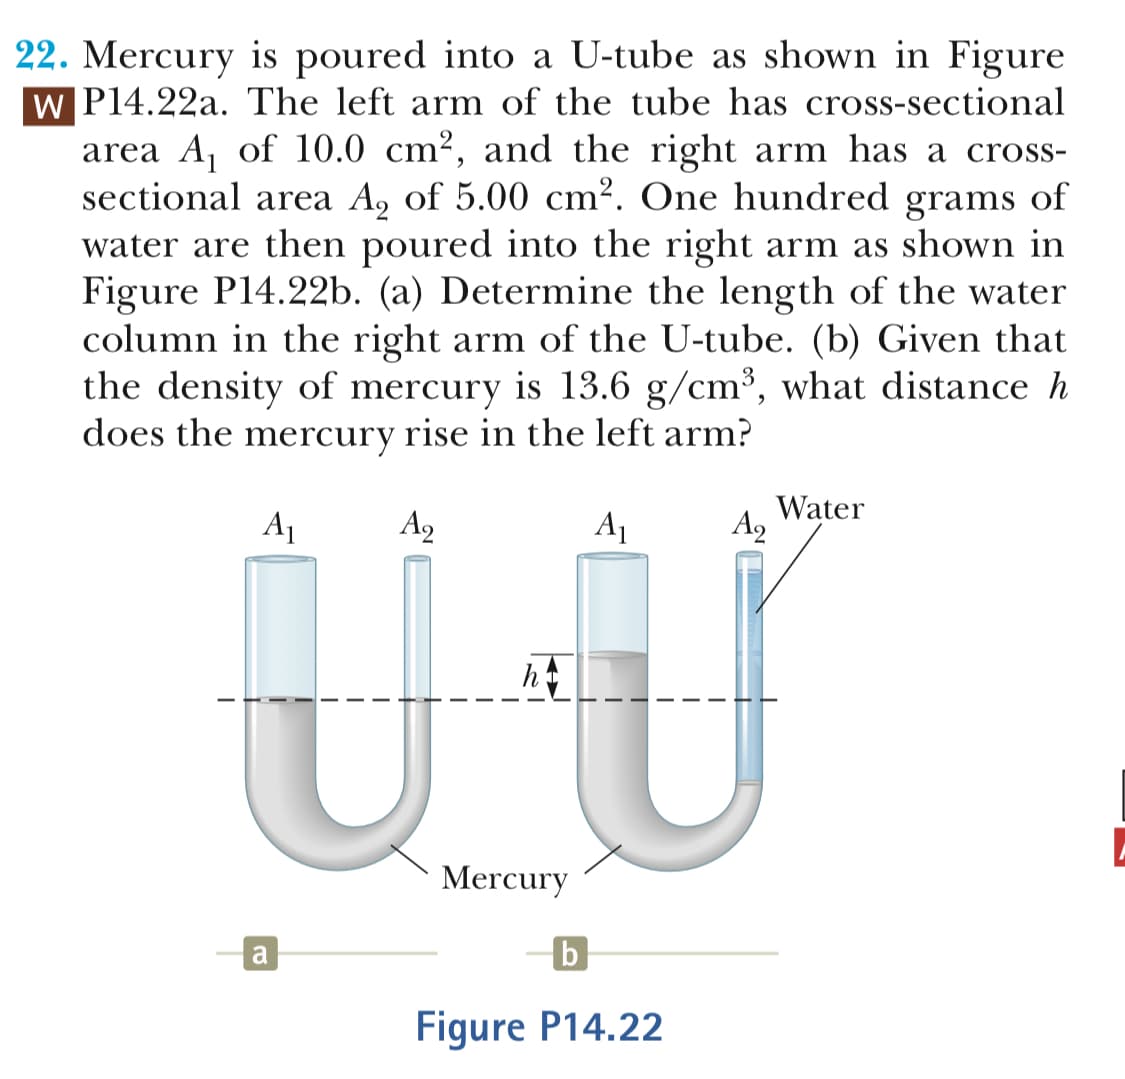 22. Mercury is poured into a U-tube as shown in Figure
P14.22a. The left arm of the tube has cross-sectional
area Aj of 10.0 cm2, and the right arm has a cross-
sectional area A2 of 5.00 cm2. One hundred grams of
water are then poured into the right arm as shown in
Figure P14.22b. (a) Determine the length of the water
column in the right arm of the U-tube. (b) Given that
the density of mercury is 13.6 g/cm3, what distance
does the mercurv rise in the left arm?
Water
Mercury
Fiqure P14.22
